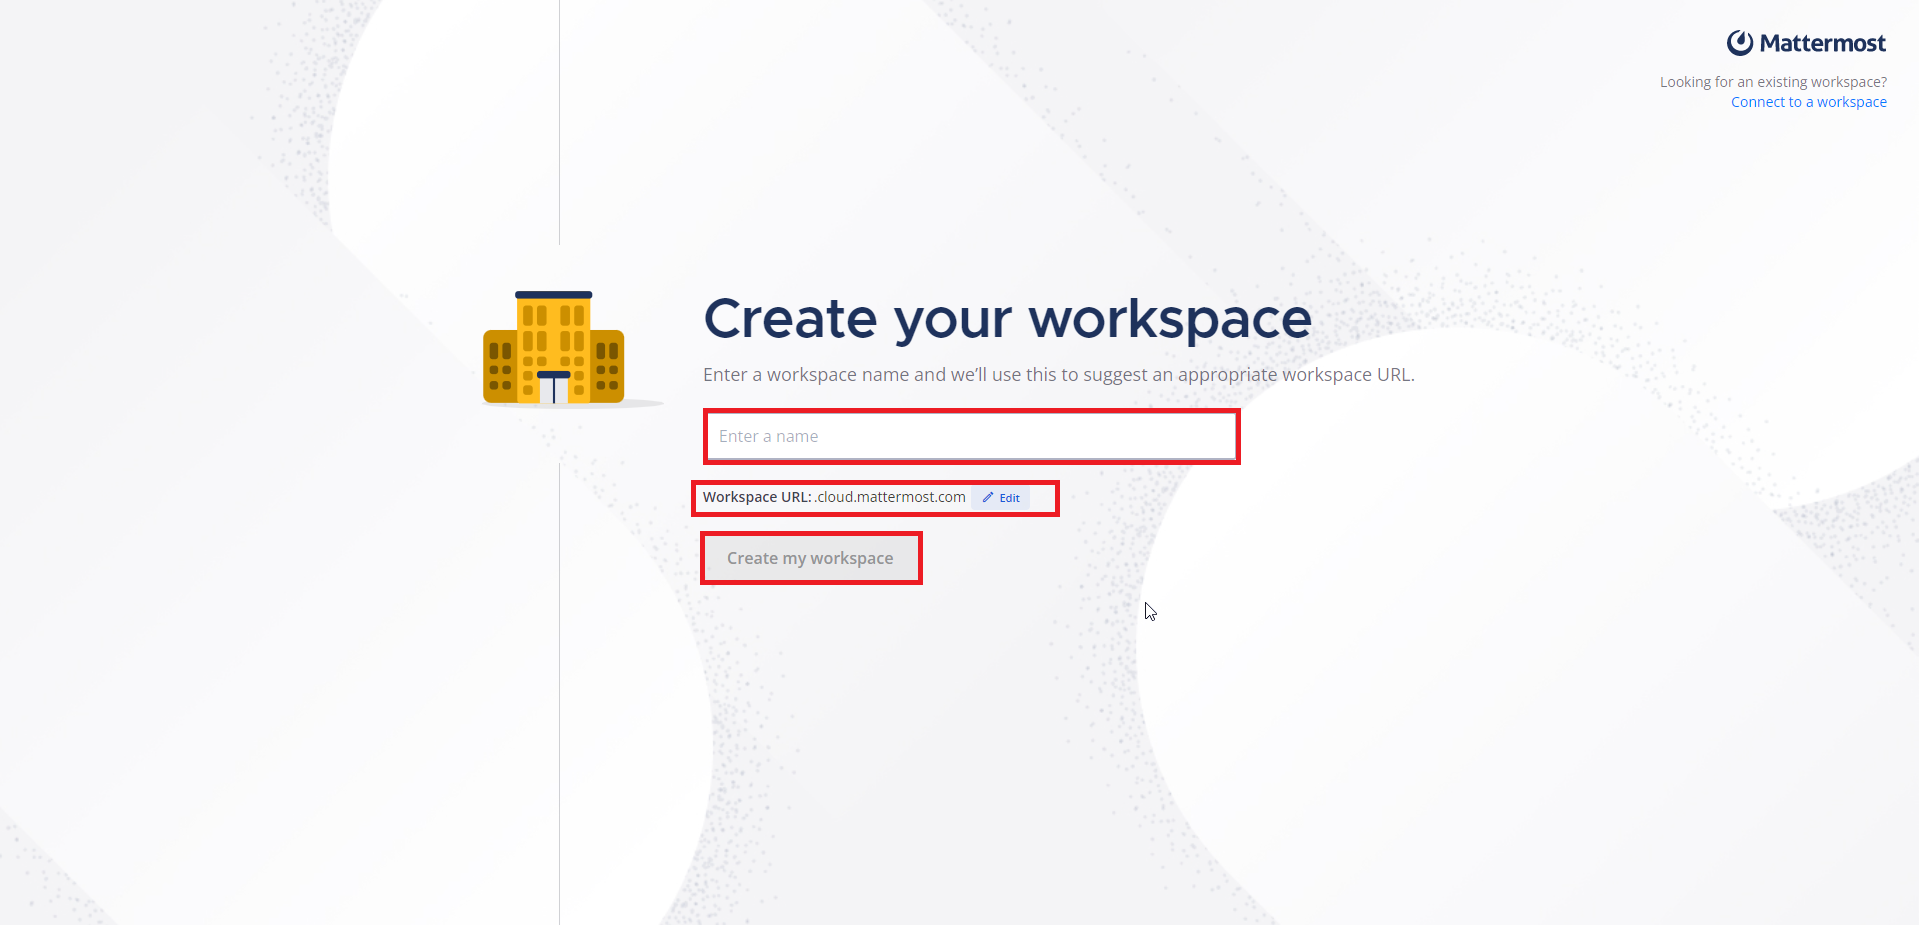 Create your workspace画面